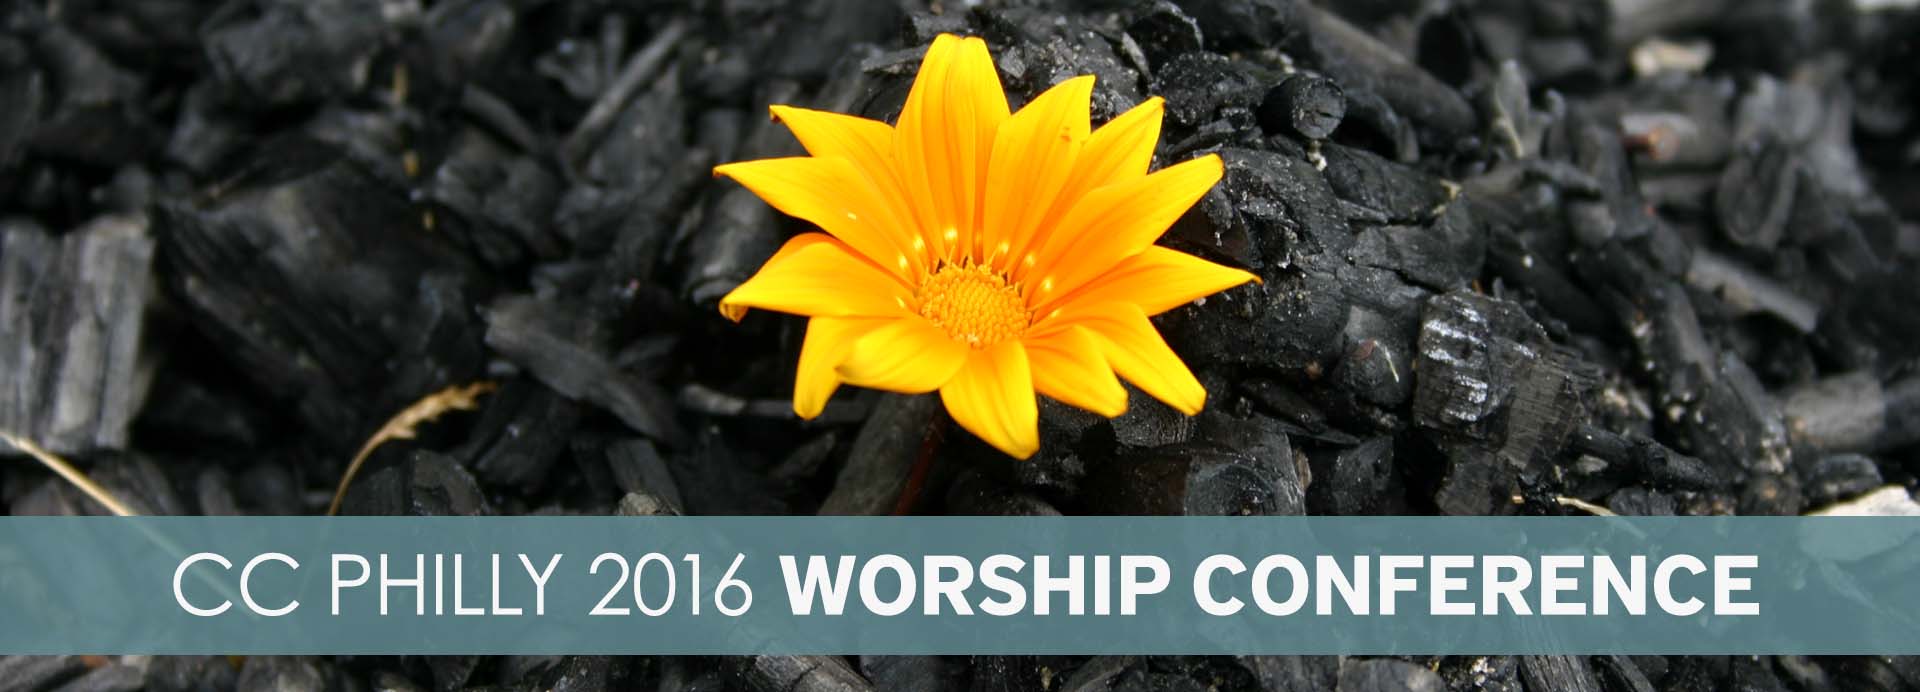 Worship Conference 2016 